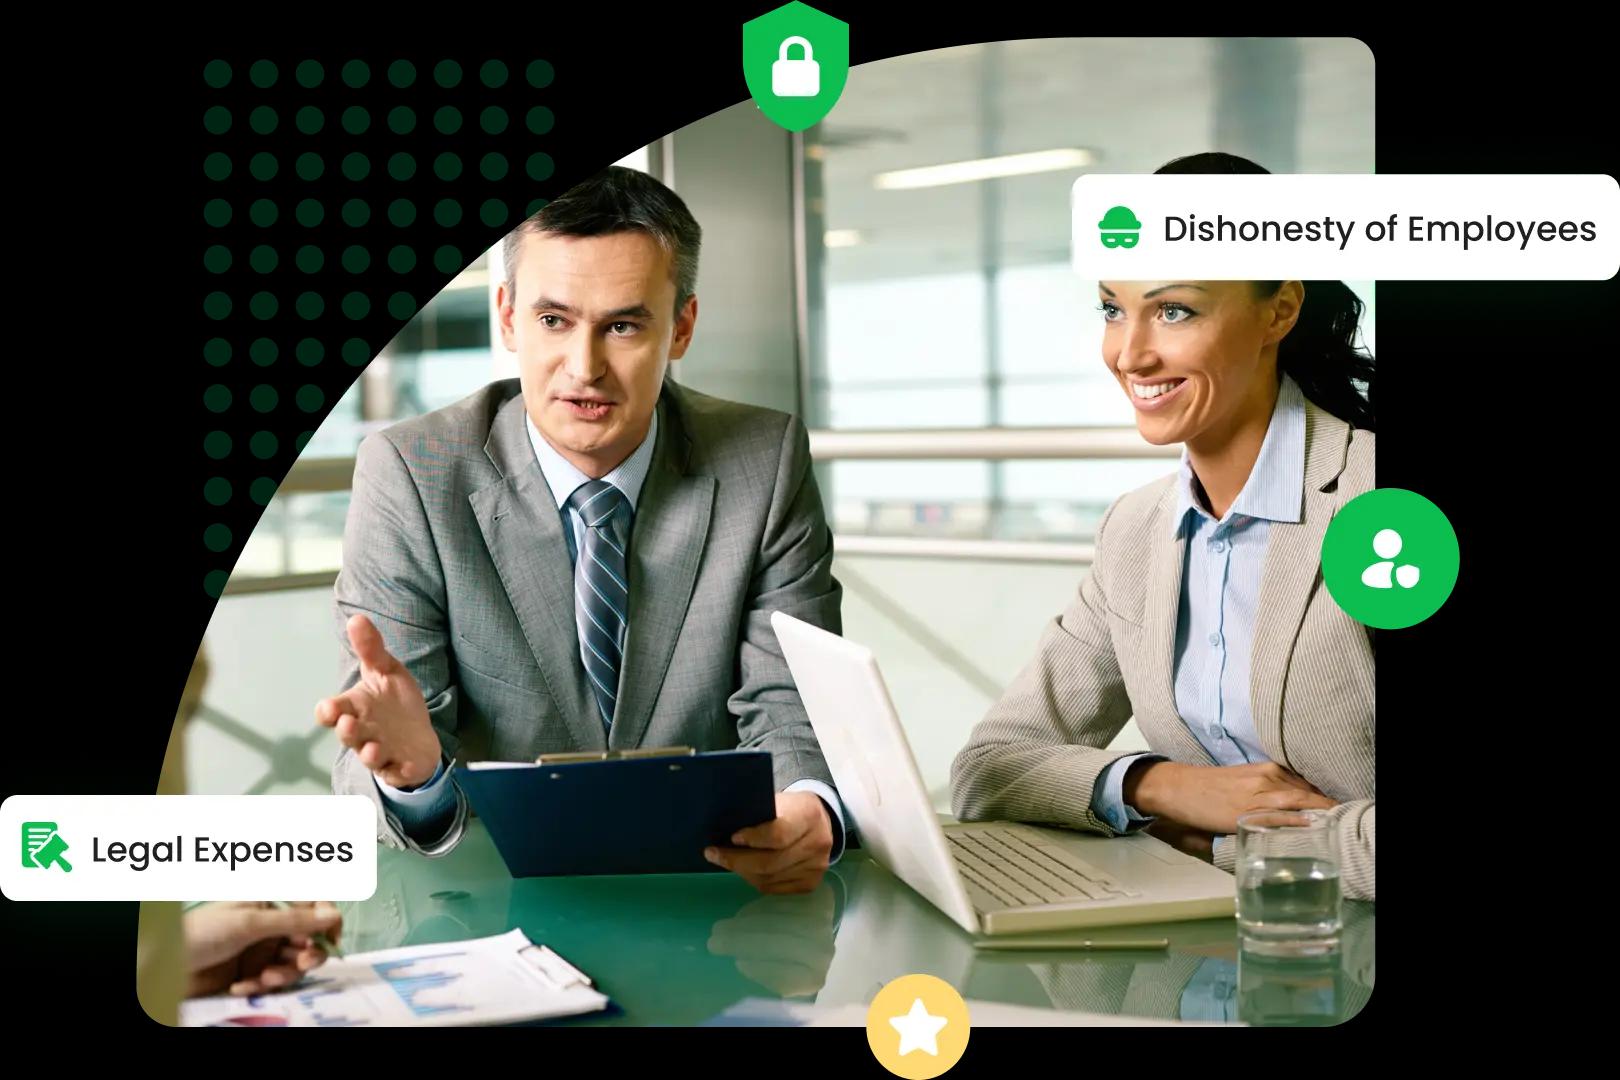 An image depicting a professional conversation, with a businessman and businesswoman at a desk. Icons for 'Legal Expenses' and 'Dishonesty of Employees' float above the scene, indicating topics of discussion pertinent to professional indemnity insurance.